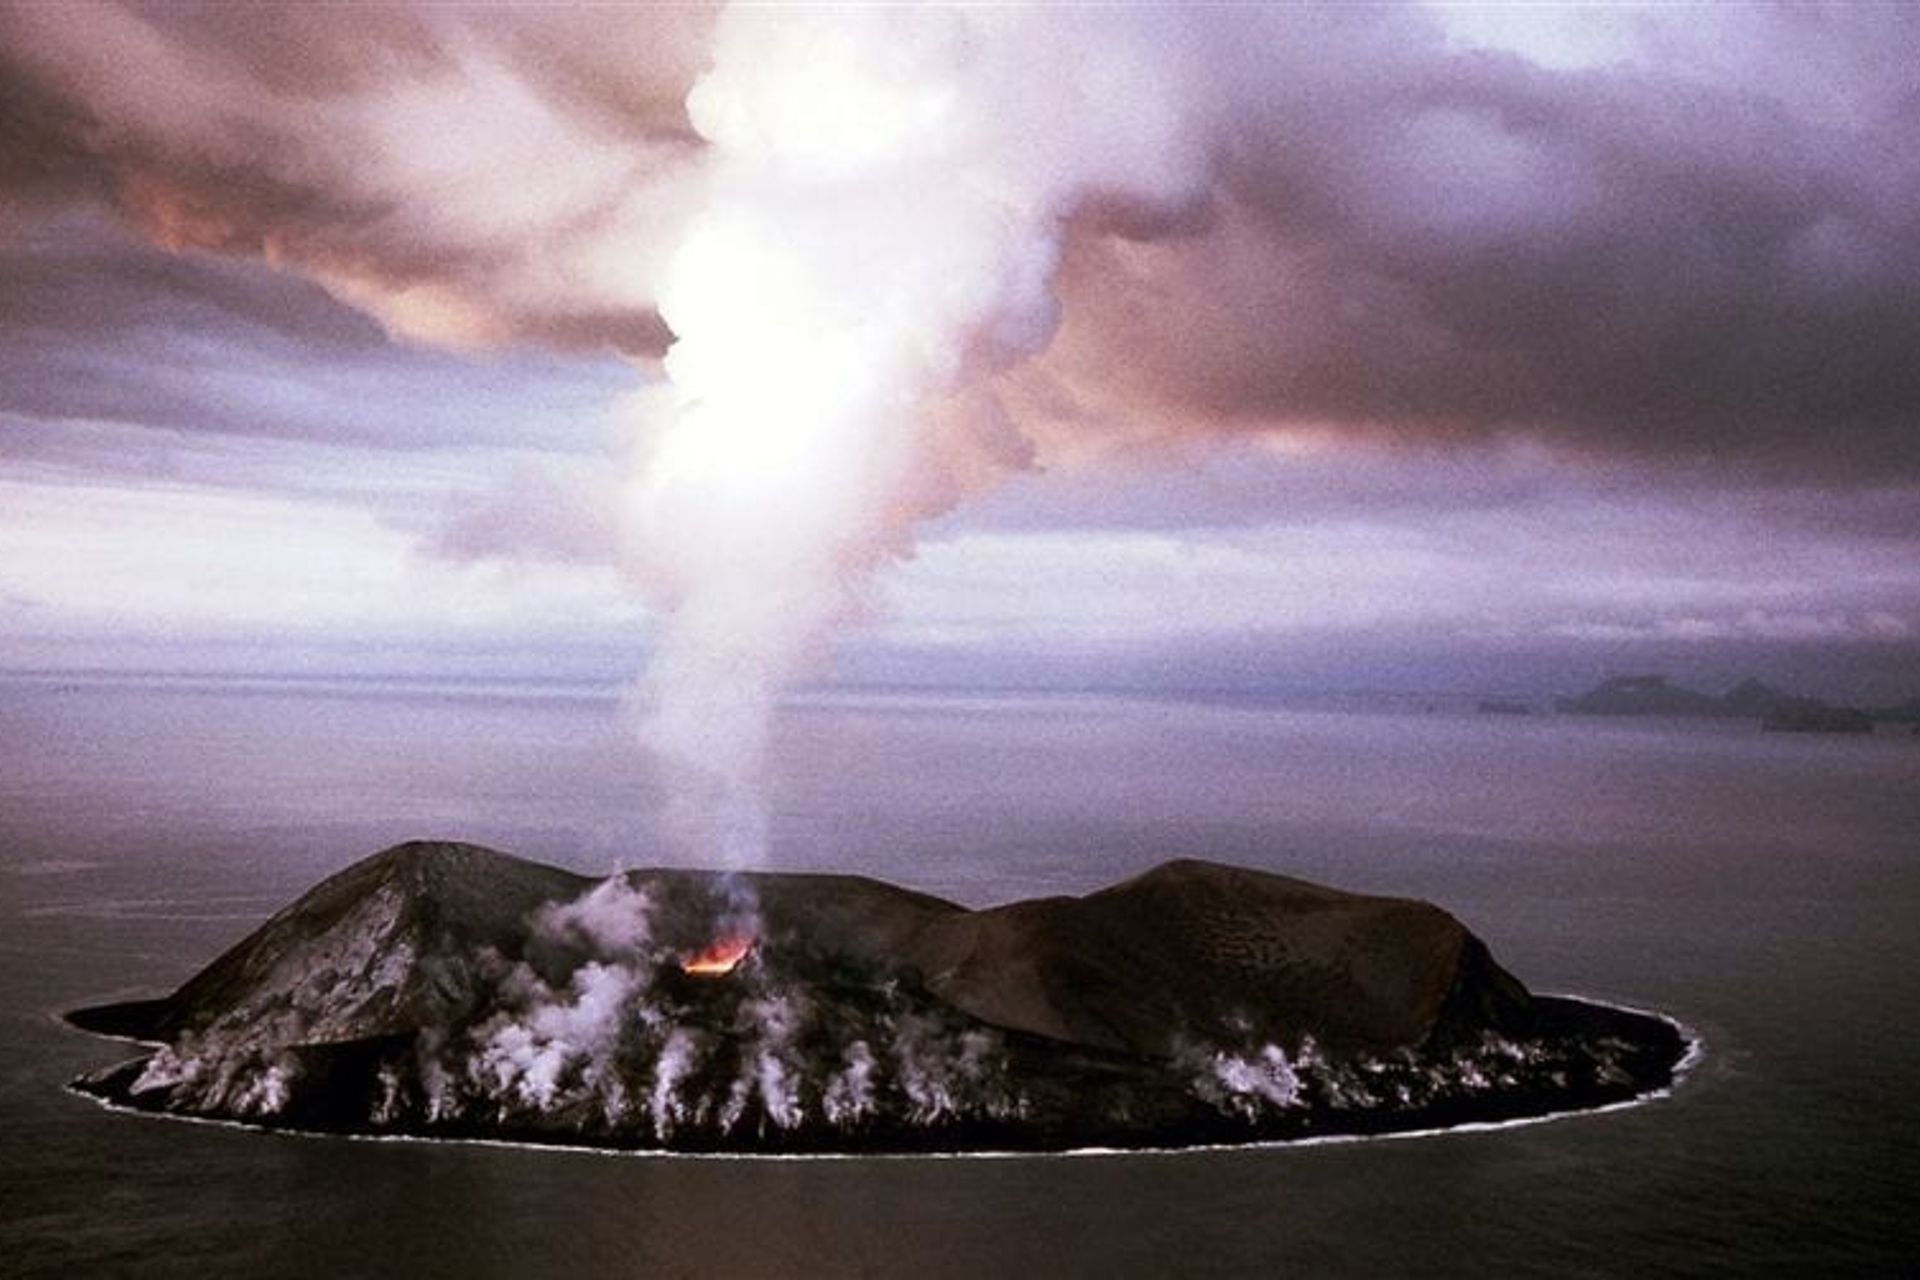 Picture from above of the Sutrsey volcano in eruption in 1963 from the westman islands